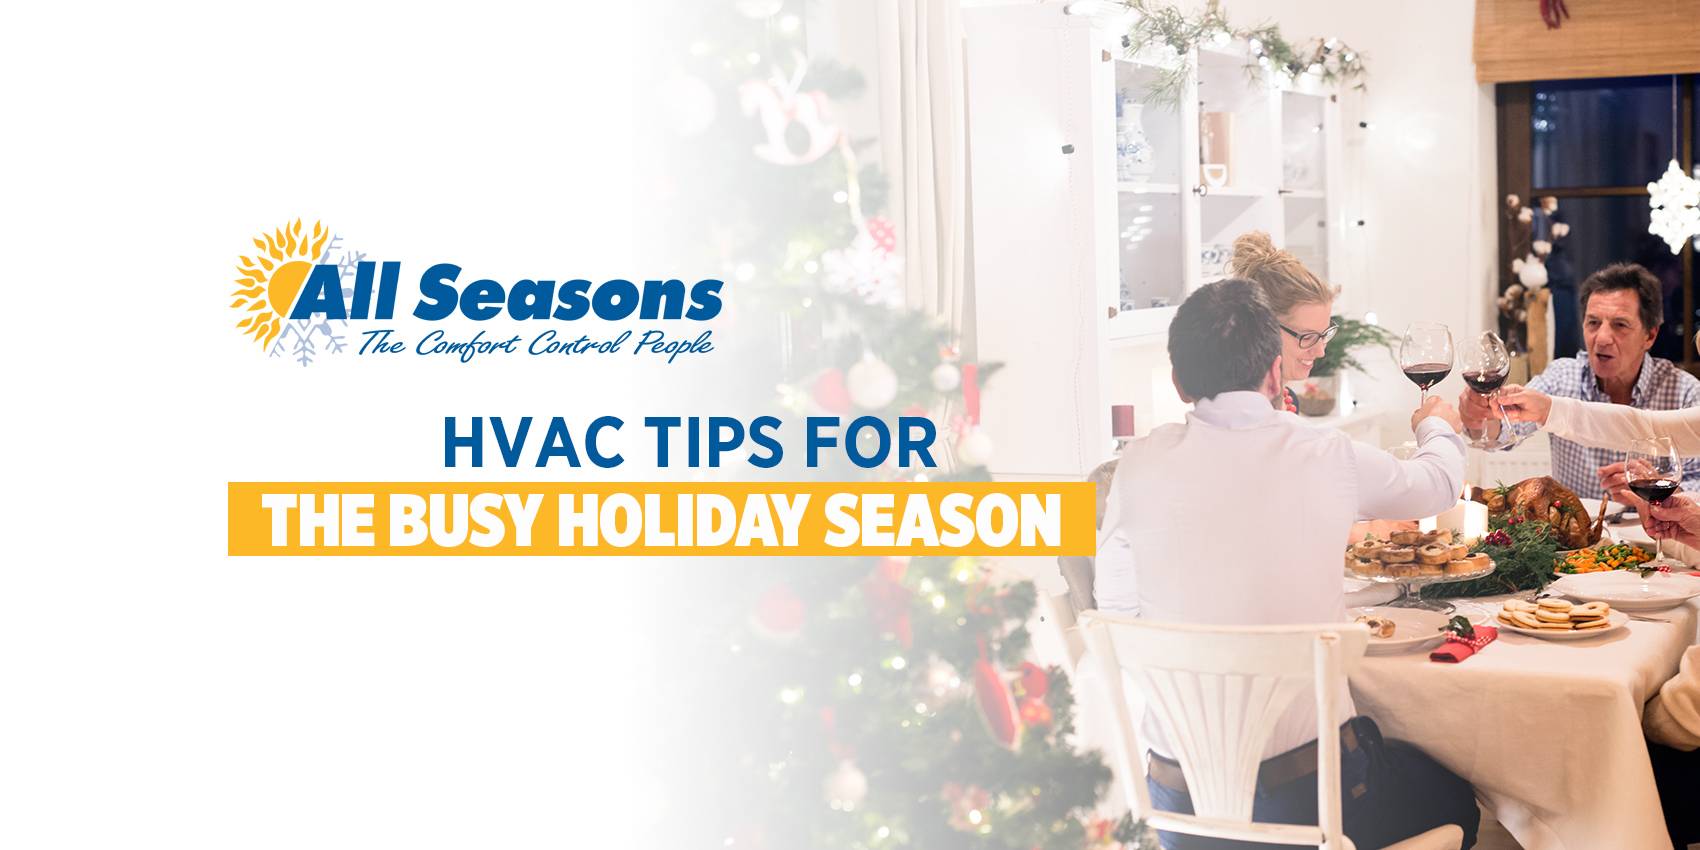 HVAC Tips for the Busy Holiday Season